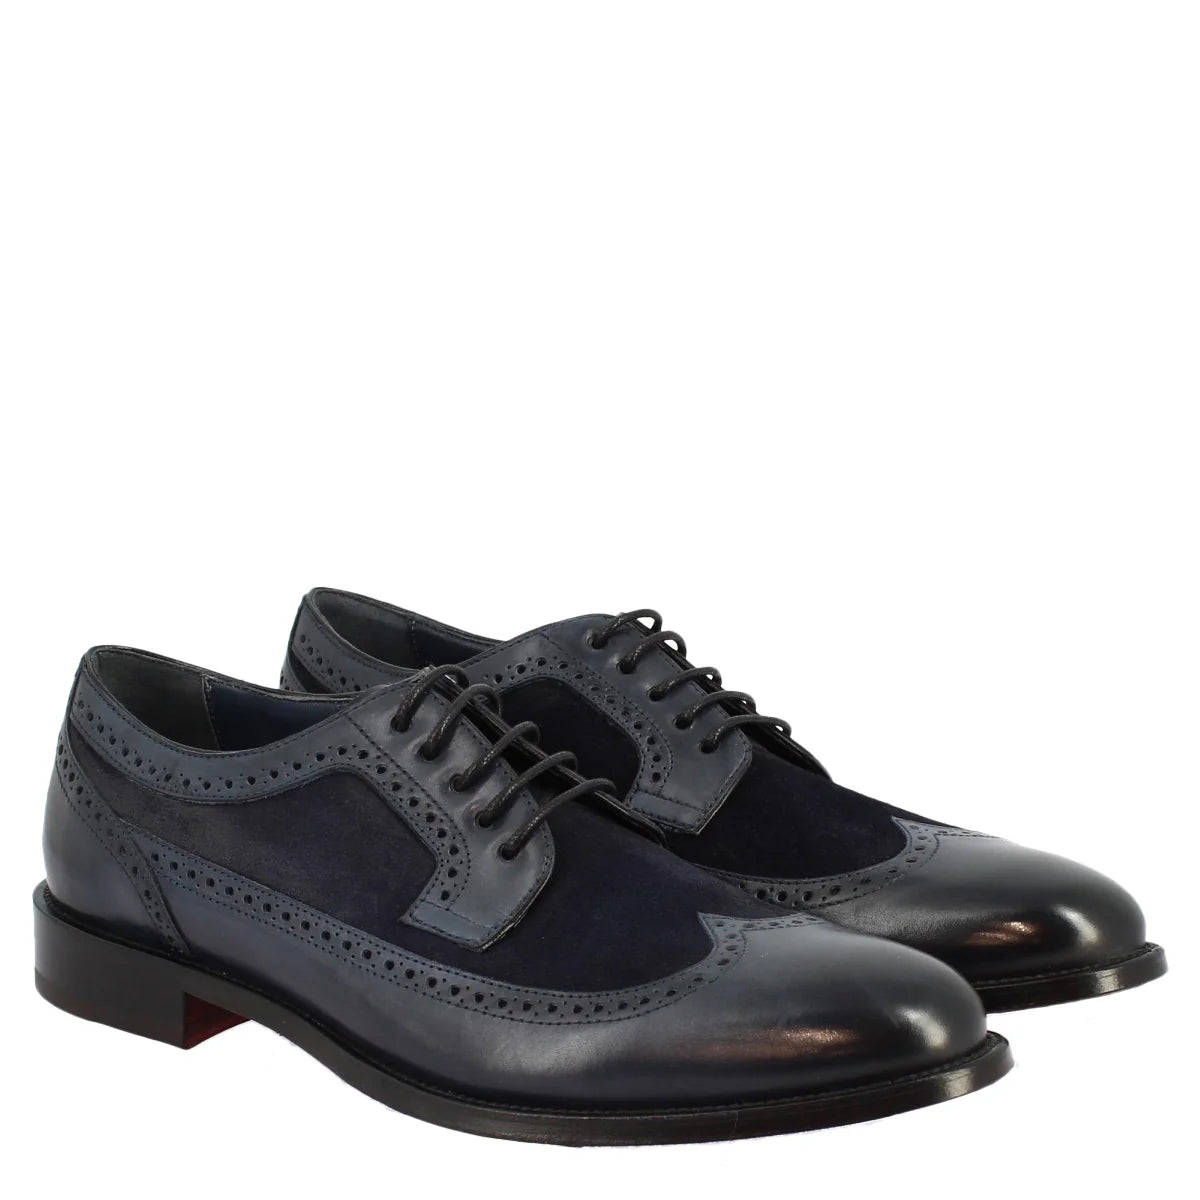 Blue calf and suede half brogues shoes